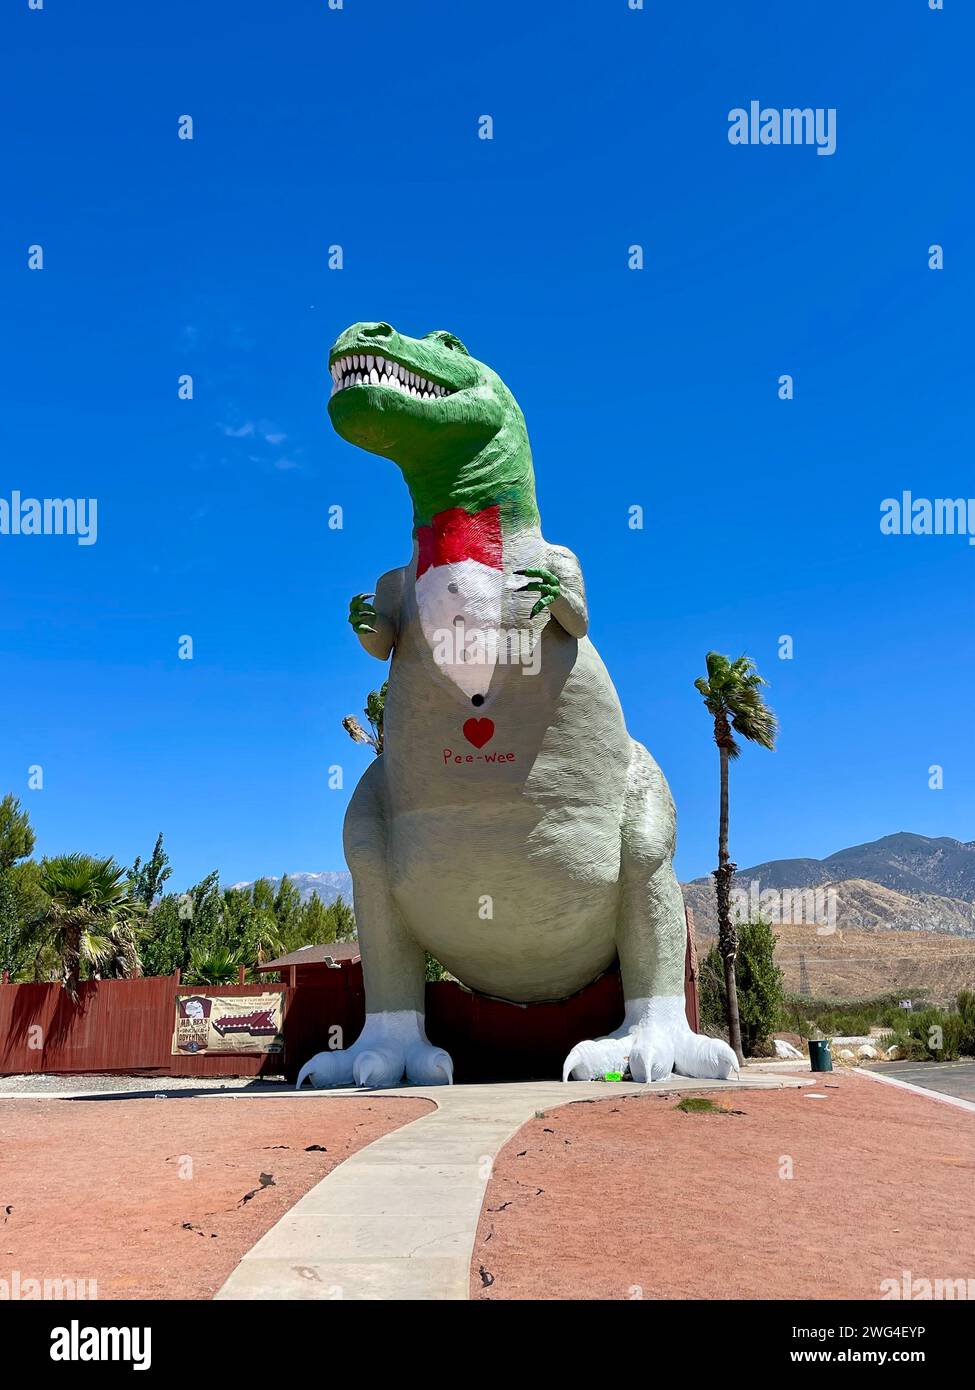 Statue of dinosaur wearing inflatable hat perched on a bench Stock Photo